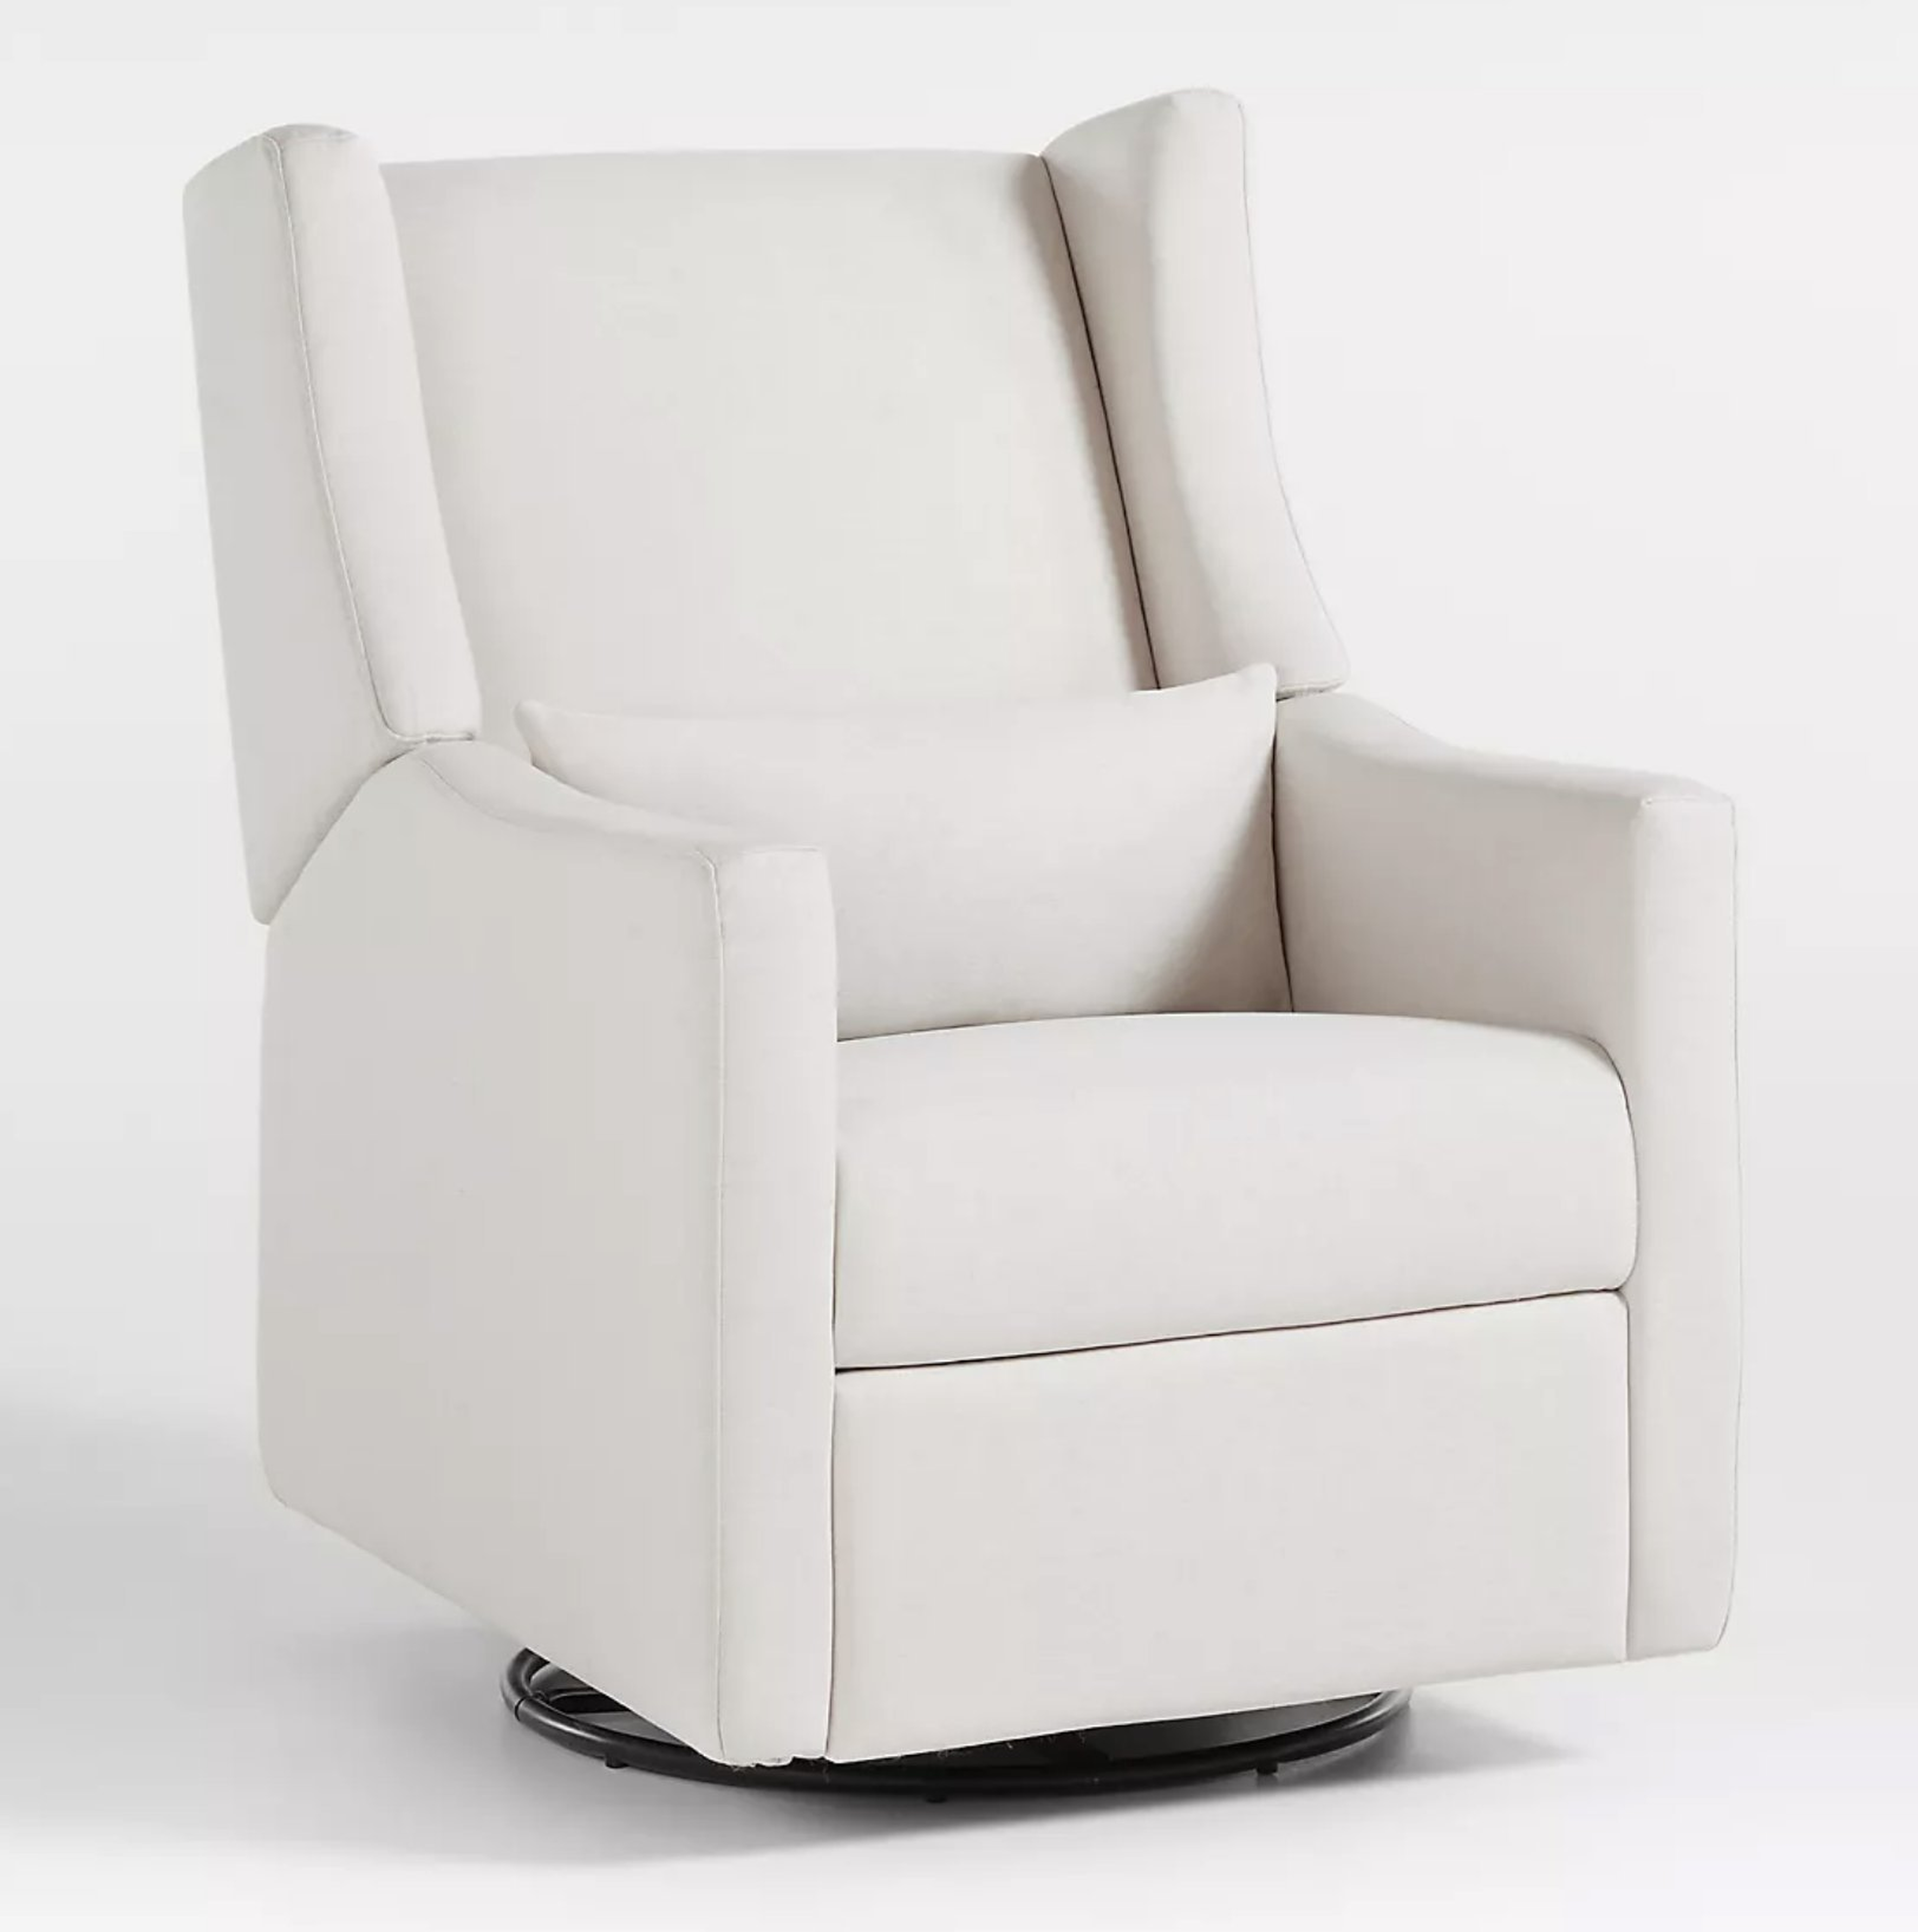 Babyletto Kiwi Glider Recliner w/ Electronic Control & USB Performance Cream Eco-Weave, Cream - Crate and Barrel